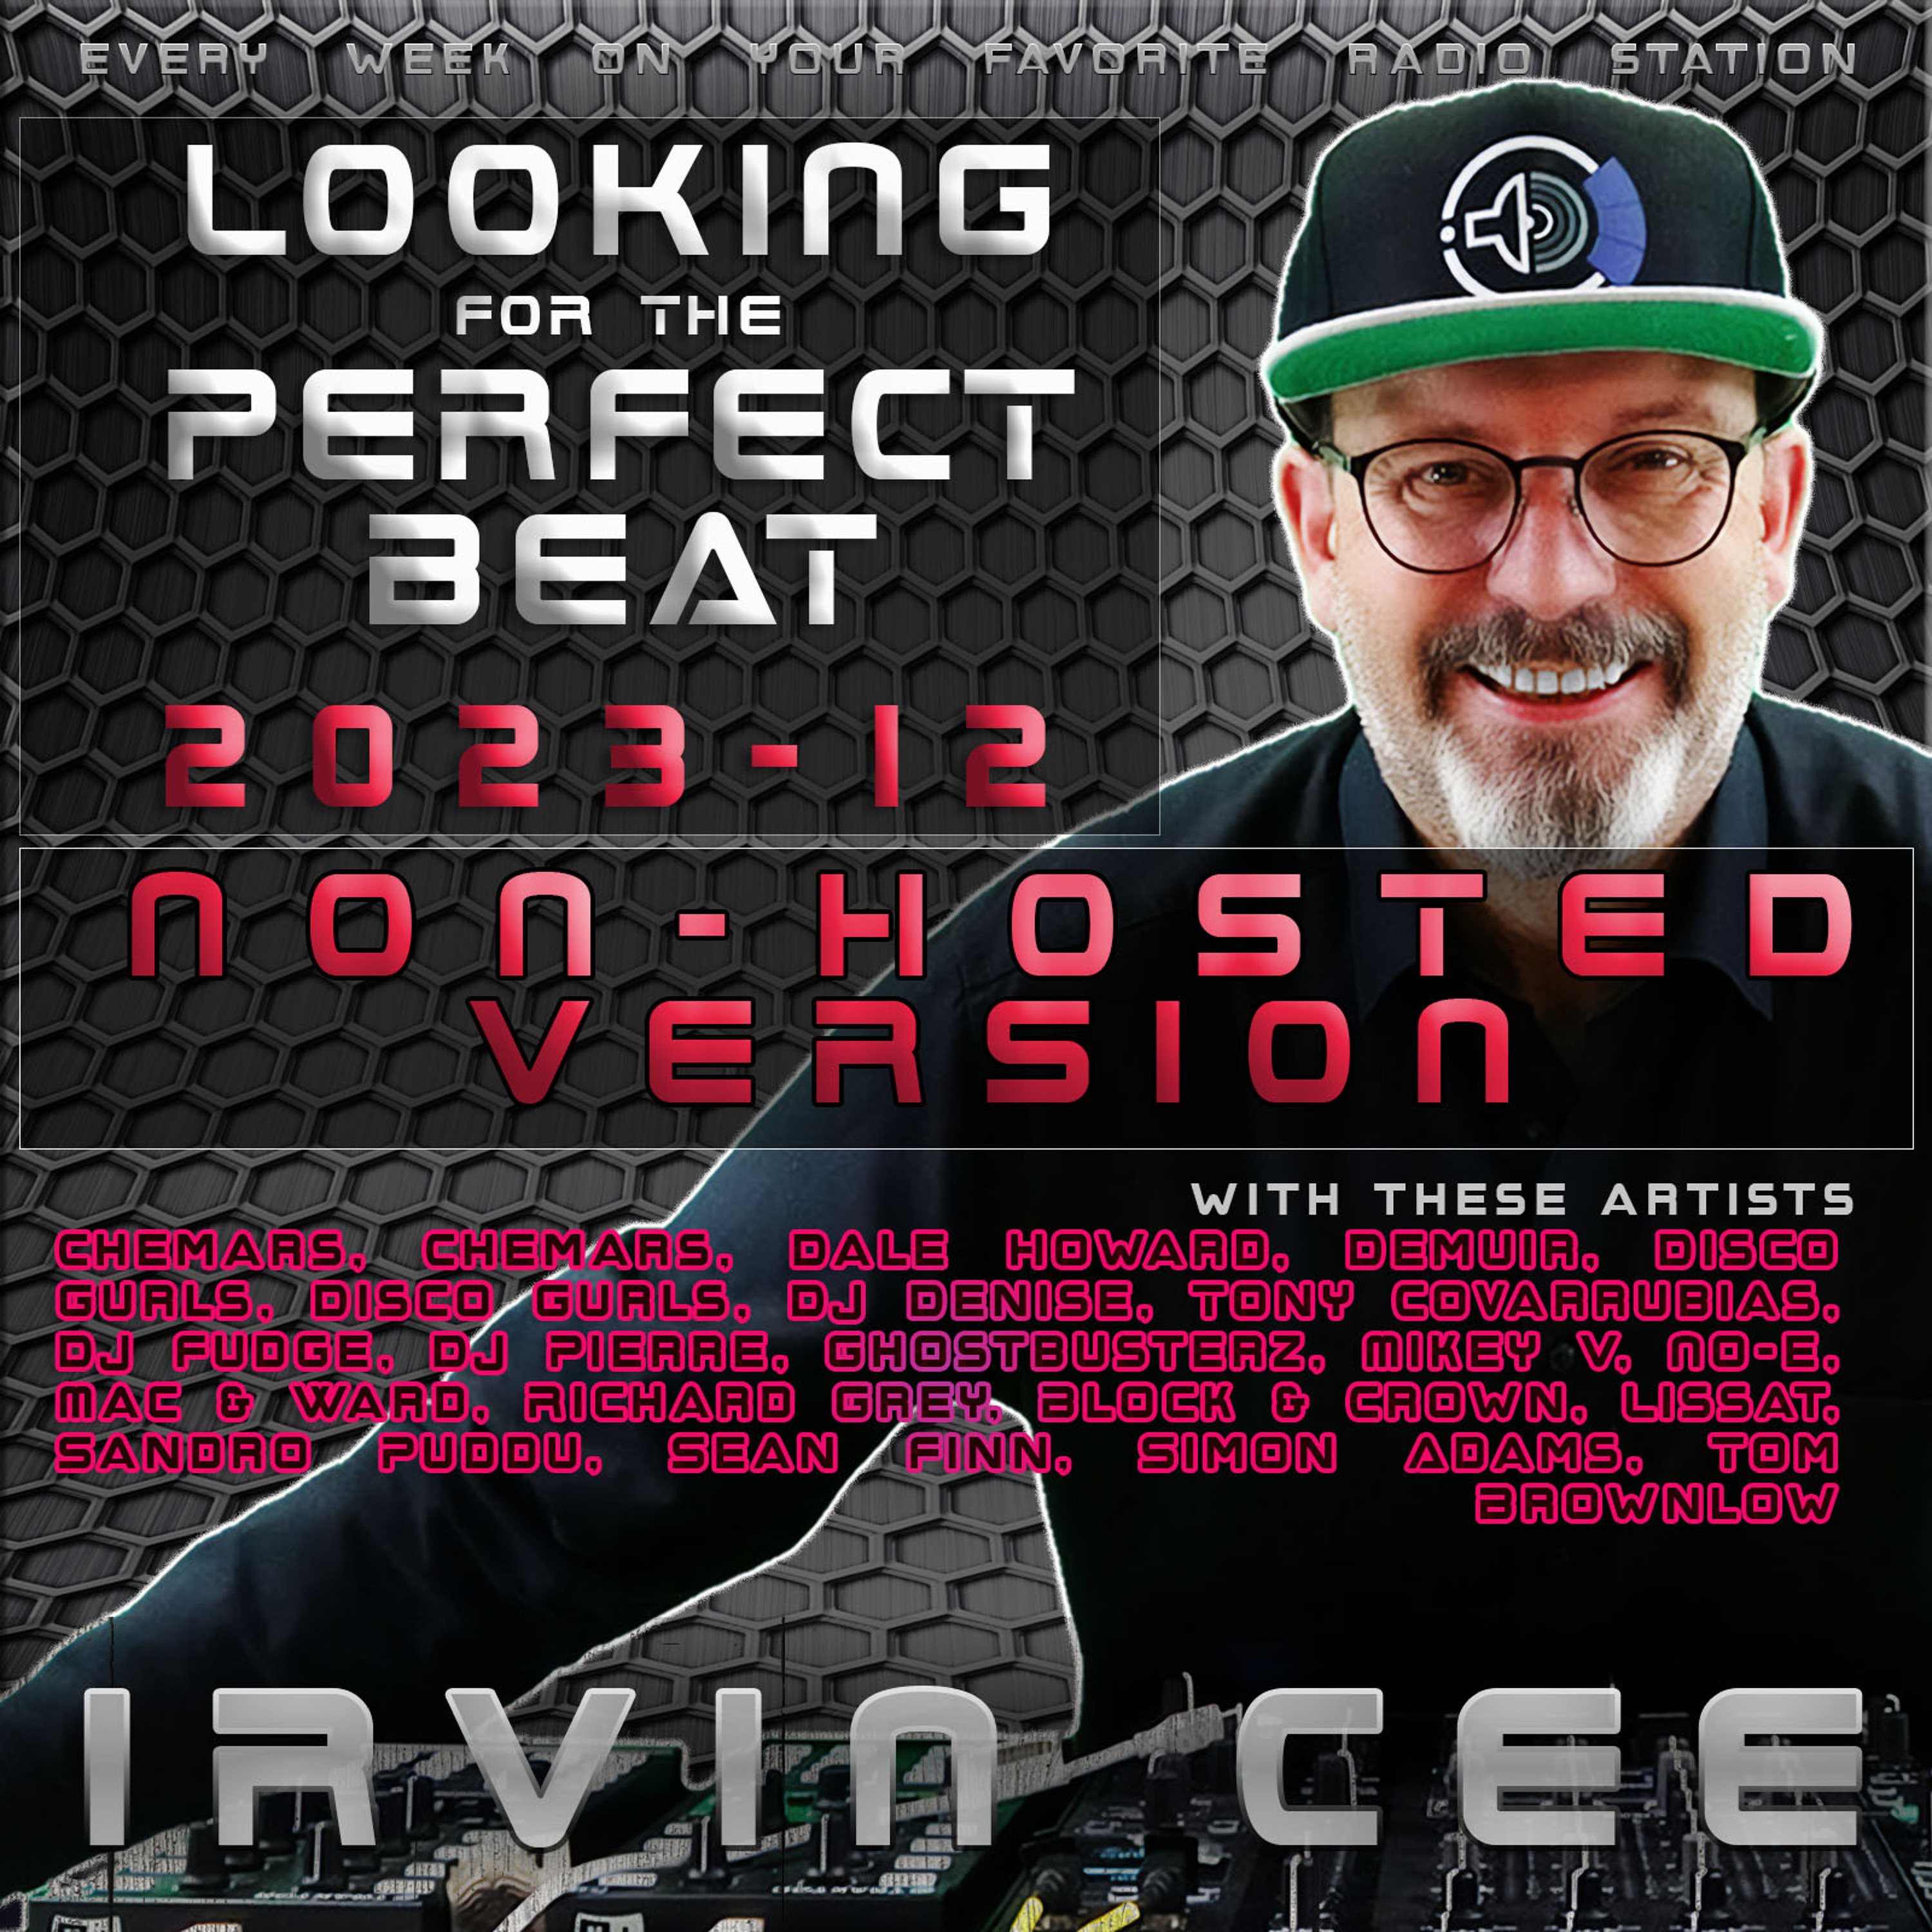 Looking for the Perfect Beat 2023-12 - non-hosted version by Irvin Cee